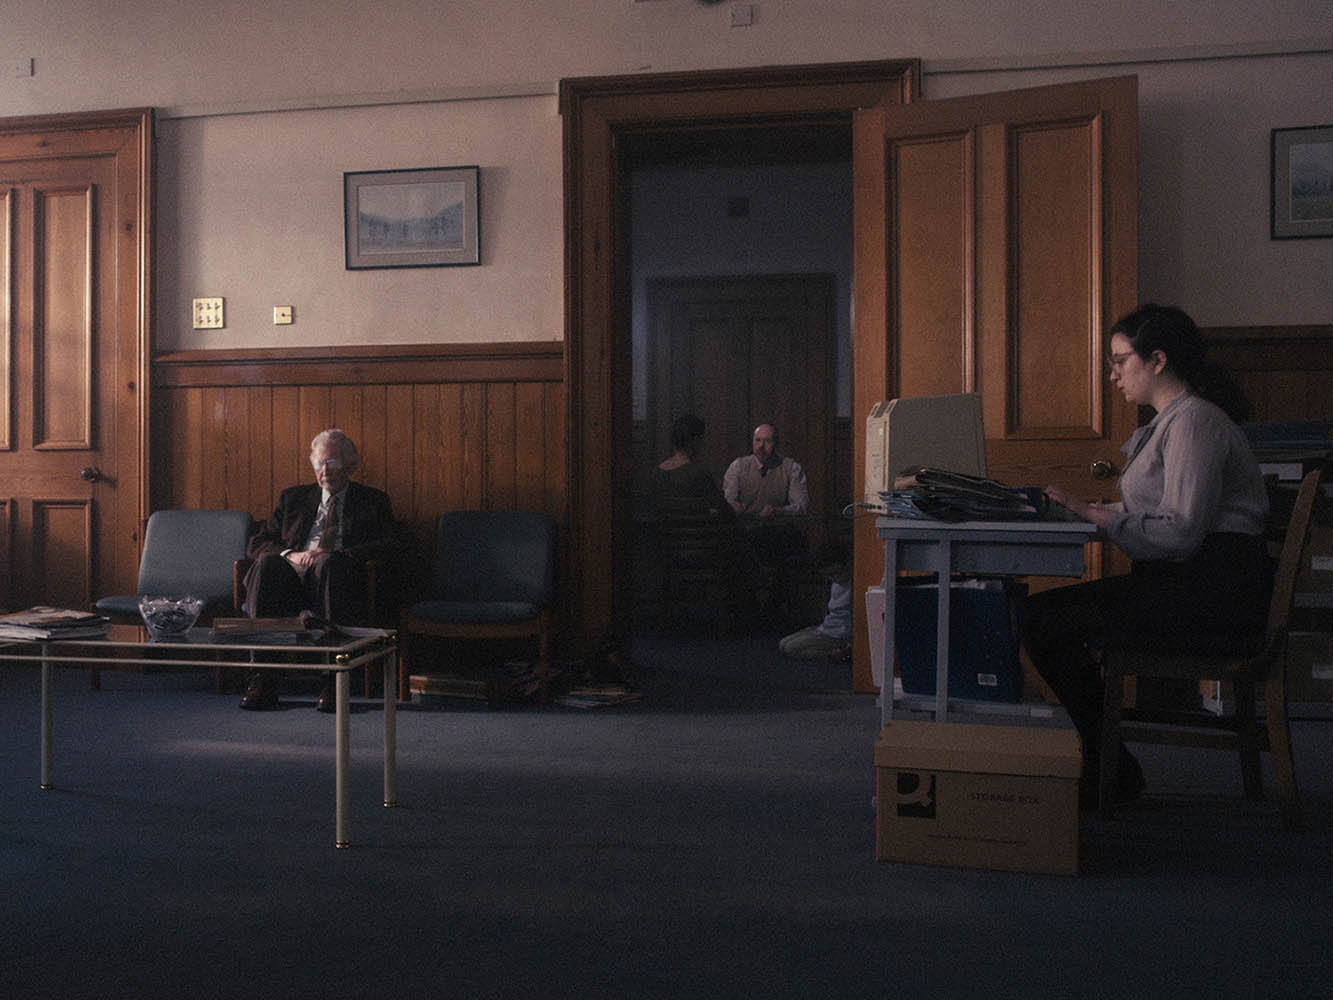 Reception room with woman sat at desk with a pile of files, older man waiting on a chair, through a door there is a man having a conversation with another person while a child kneels on the floor